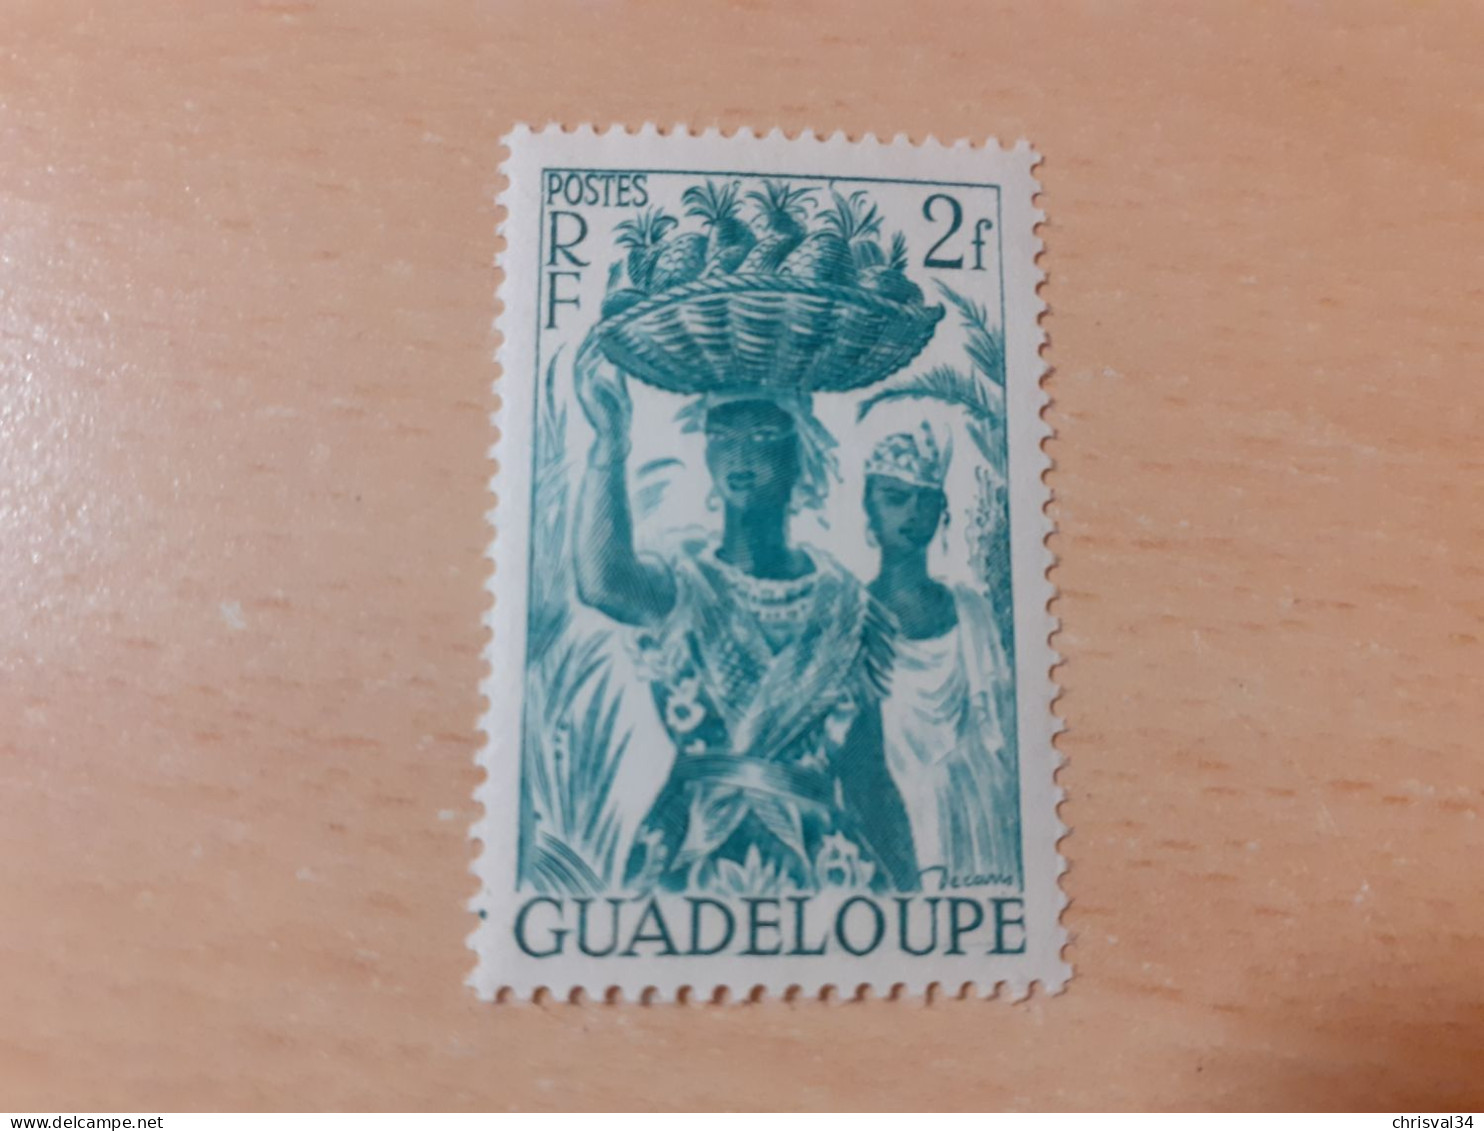 TIMBRE   GUADELOUPE       N  203    COTE  1,50   EUROS  NEUF  TRACE  CHARNIERE - Ongebruikt